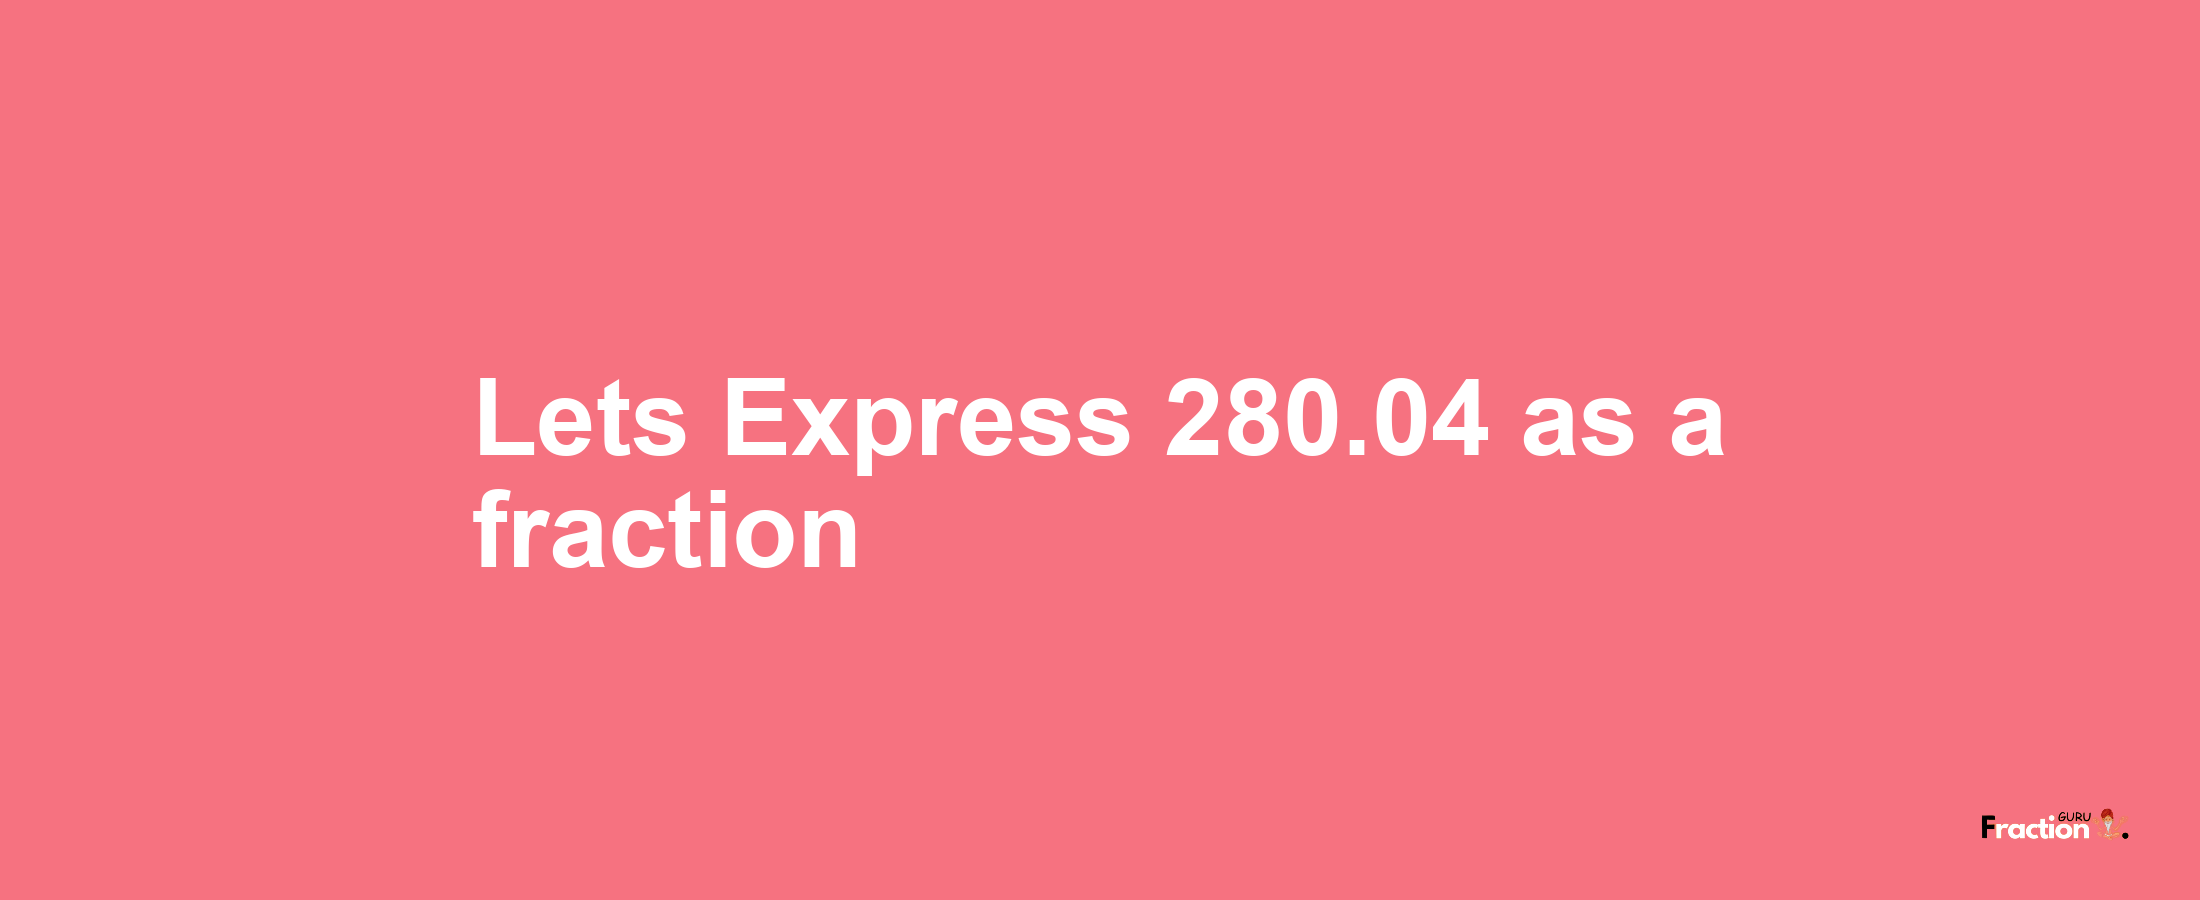 Lets Express 280.04 as afraction